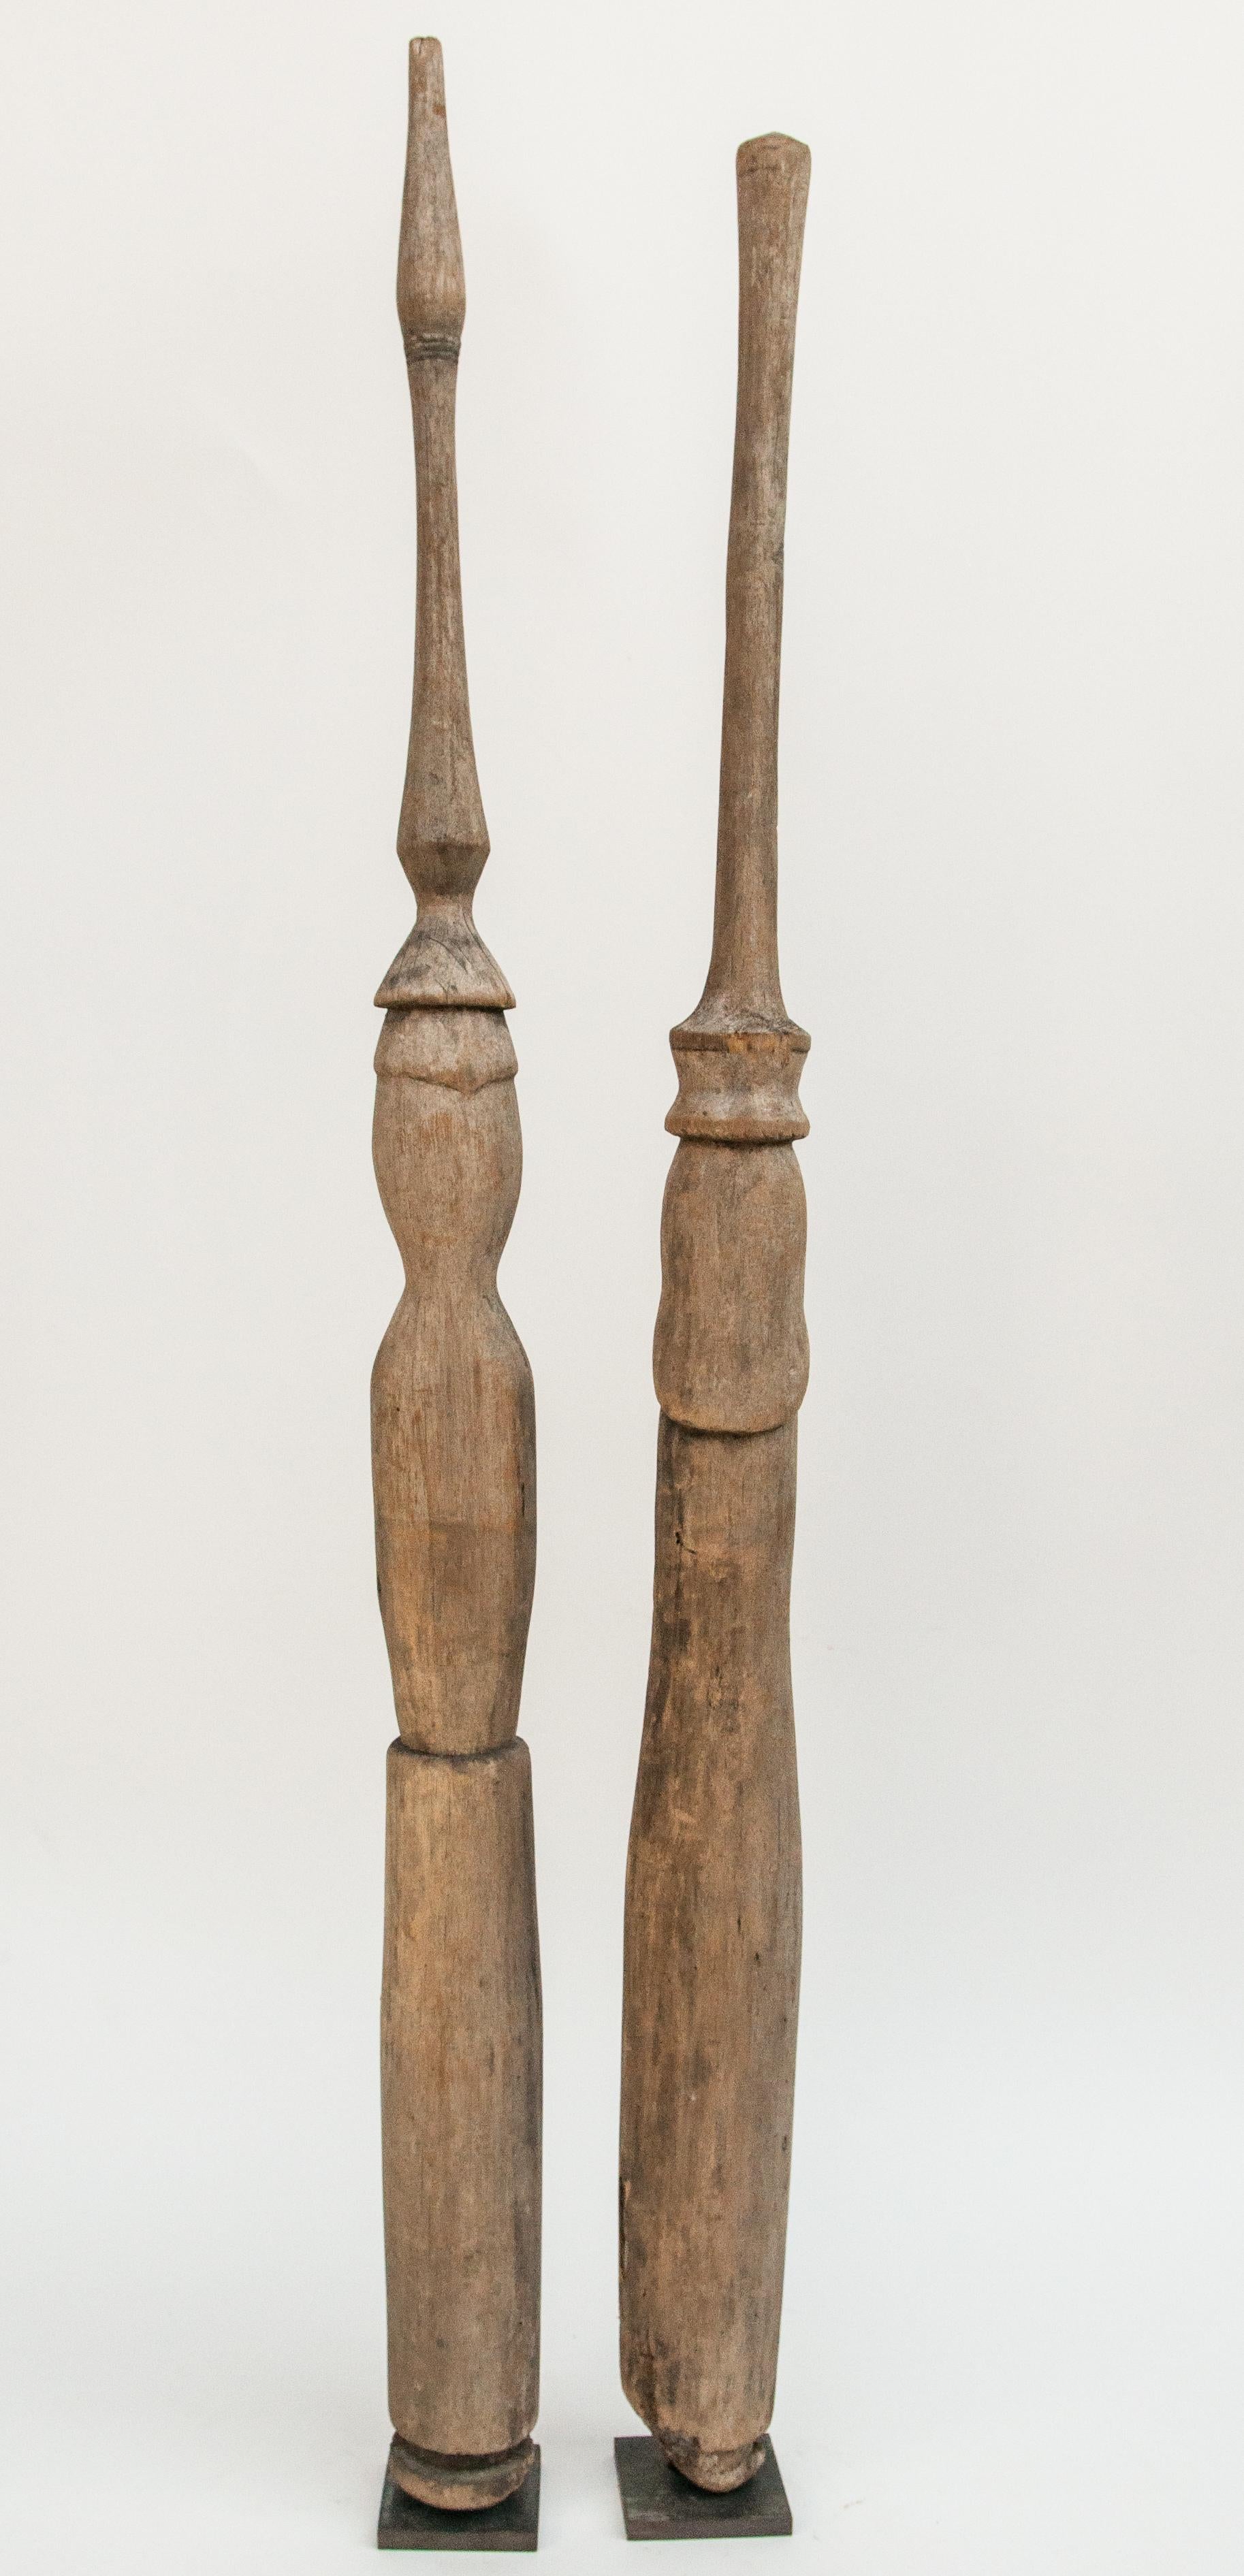 Hand-Carved Pair of Carved Tribal Net Buoys from Mentawai Island, Mid-Late 20th Century